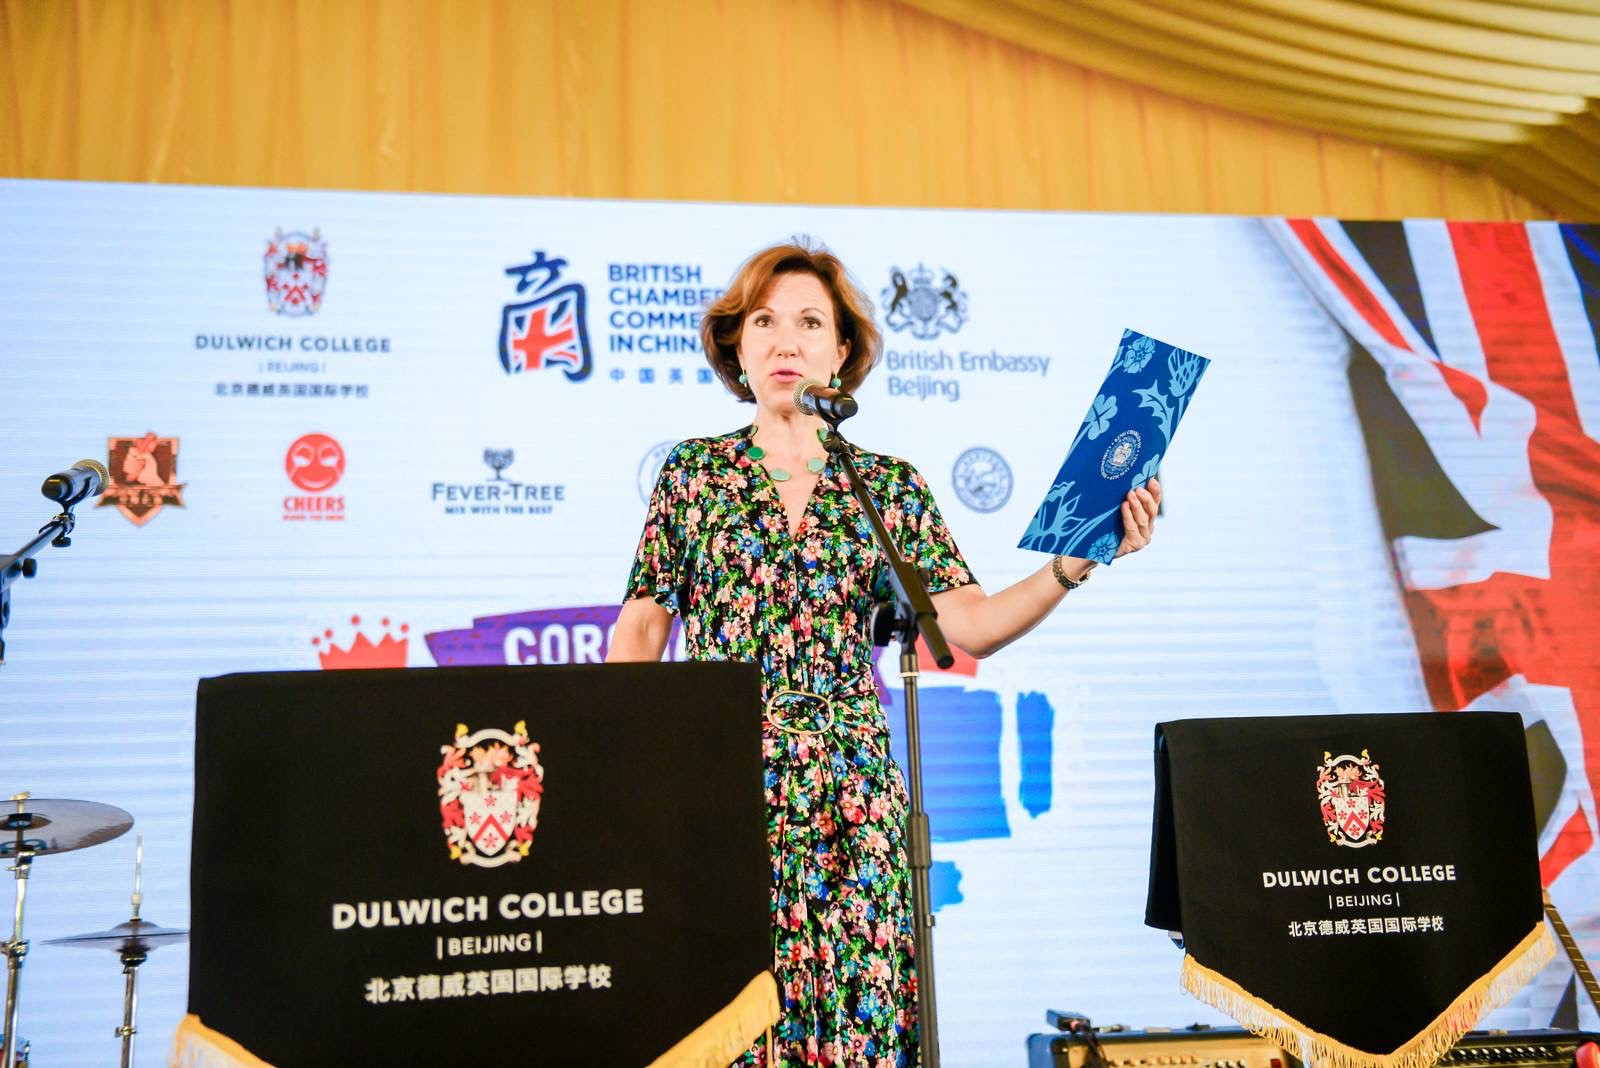 Caroline Wilson, the British Ambassador to China, giving a speech at the Lunch